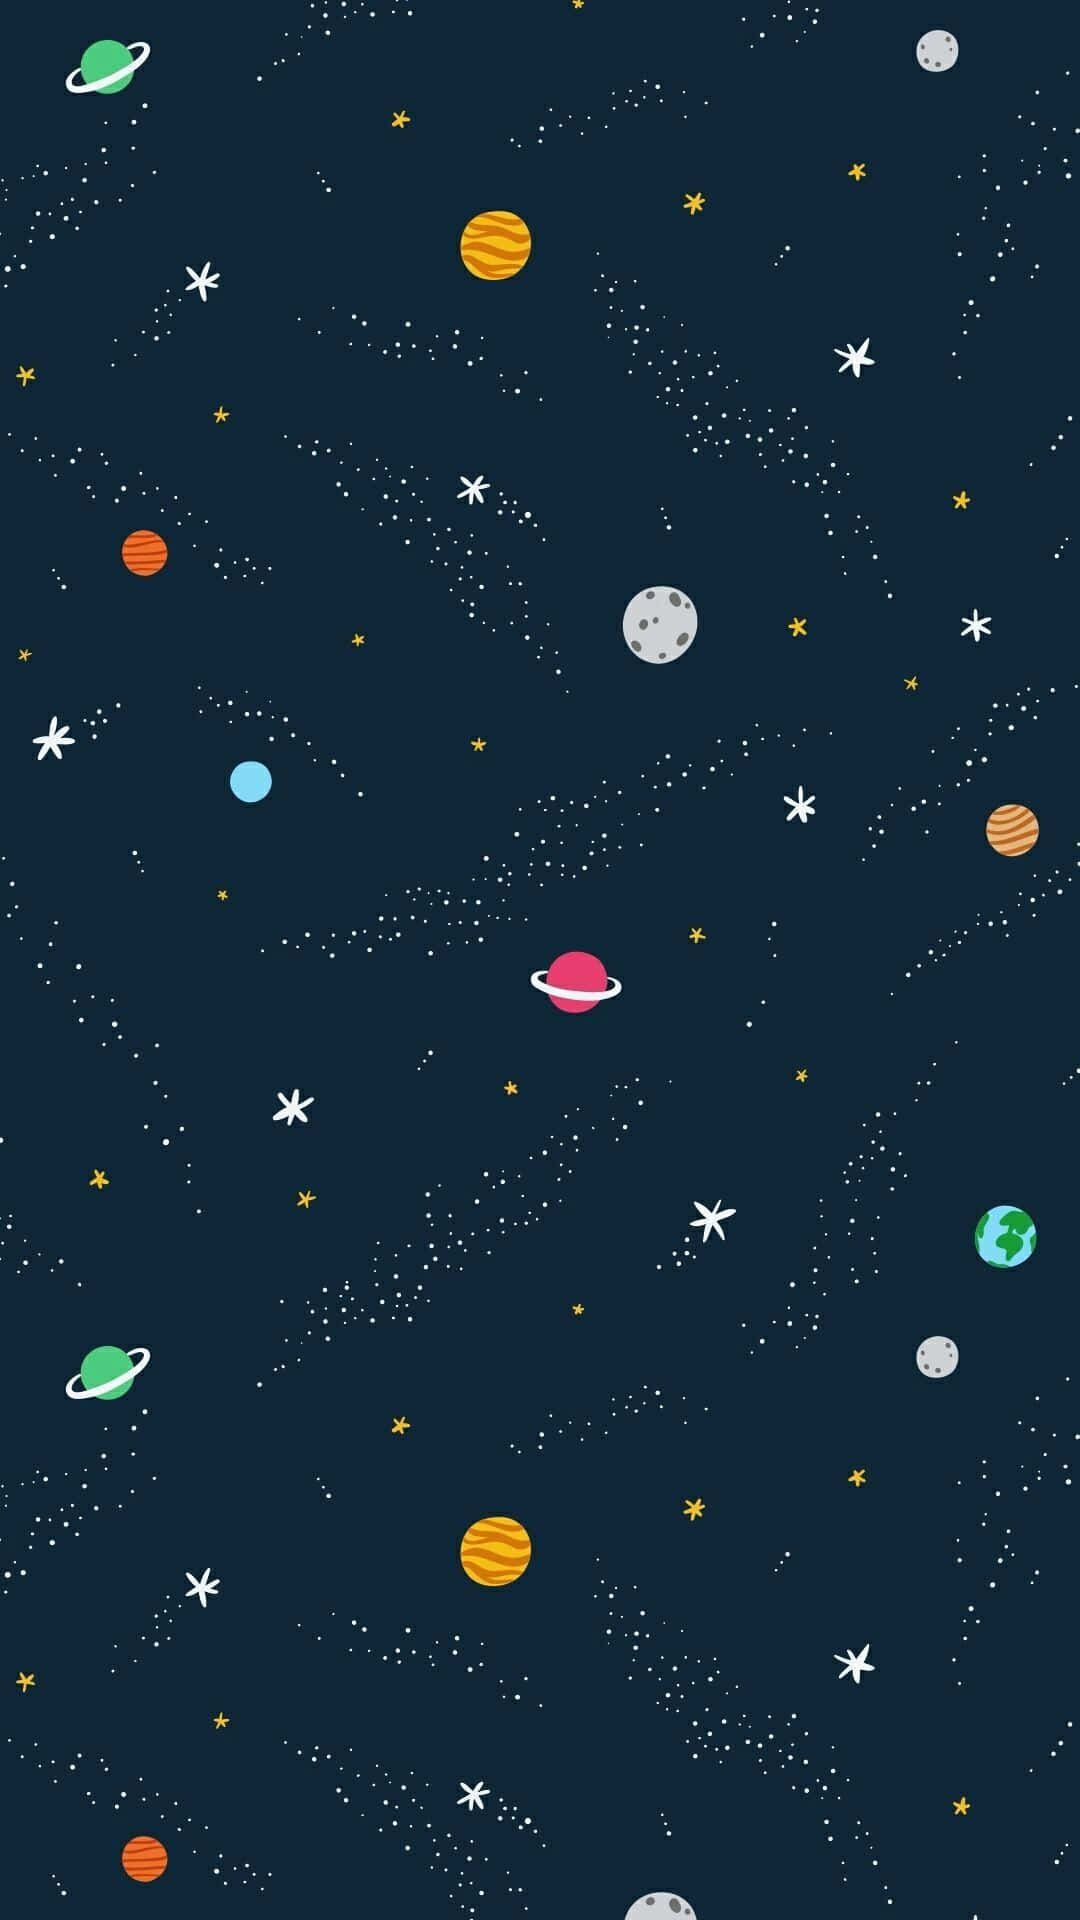 Journey Through the Mysterious Animated Space Wallpaper